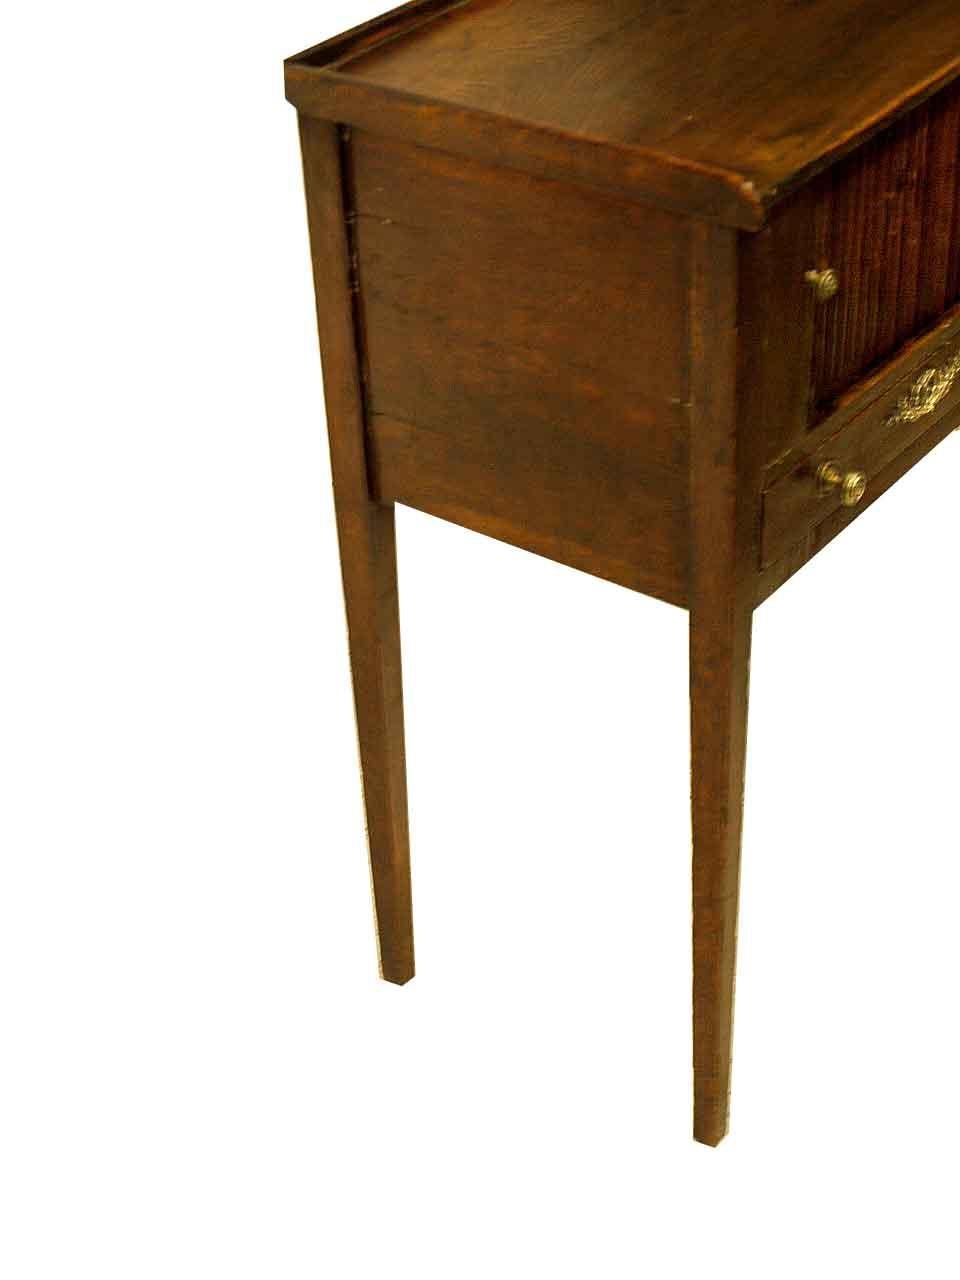 French oak tambour stand, the top has a .38'' gallery around the edge; the front features a sliding tambour door revealing open interior, single drawer with brass knobs and escutcheon; the slender legs are nicely tapered; original finish.